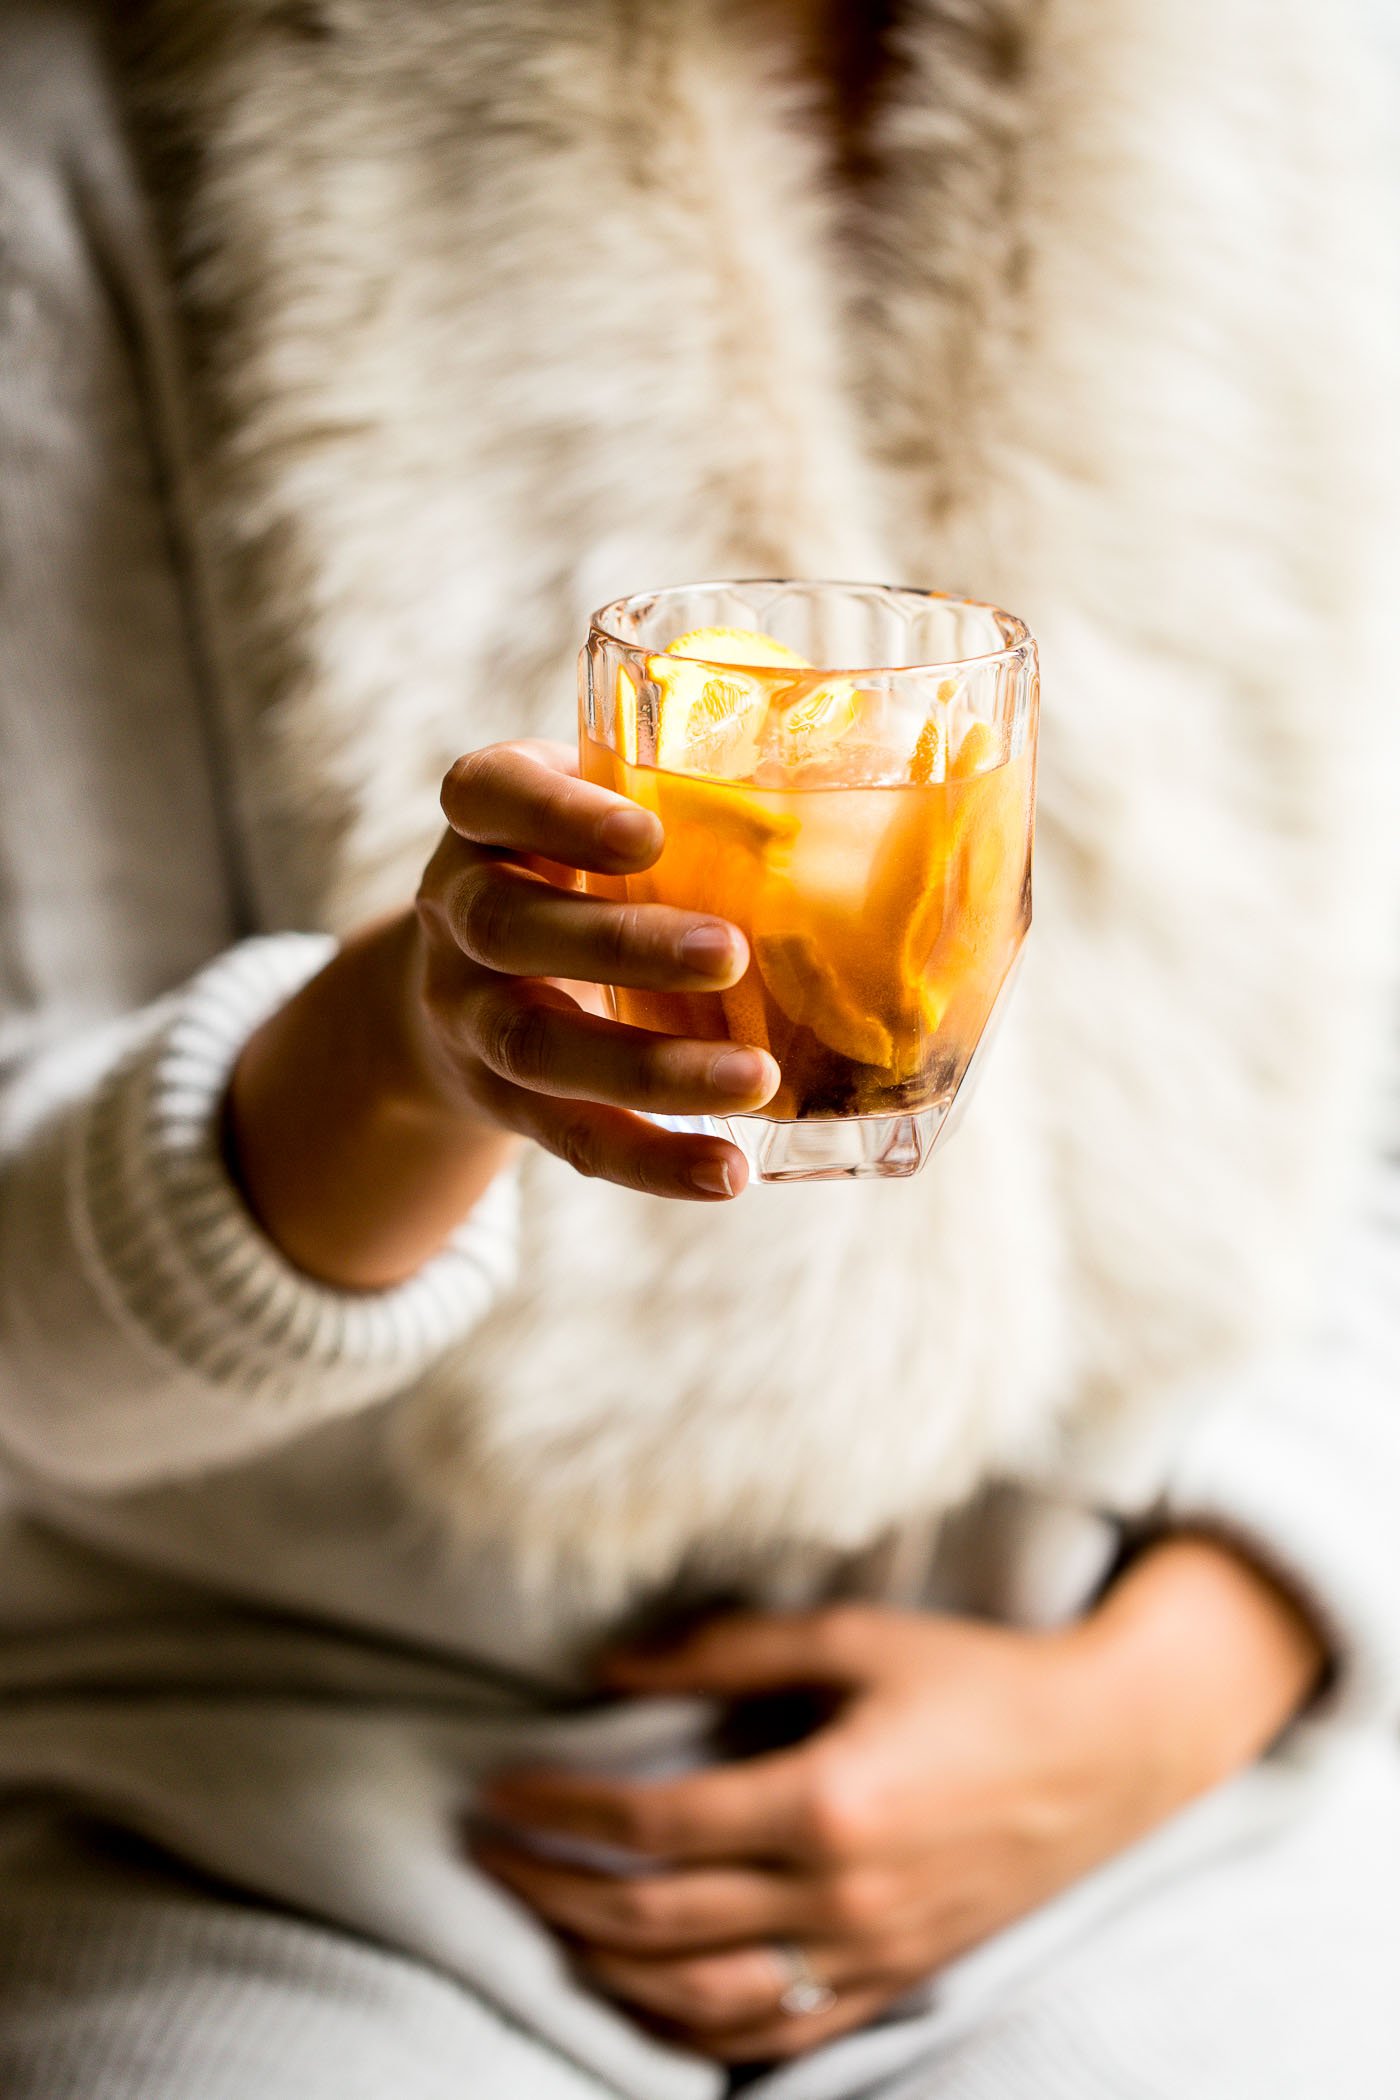 cozy bourbon old fashioneds sweetened with homemade sweet potato simple syrup. the perfect autumn cocktail for fall parties or a cozy date night at home. #playswellwithbutter #cocktail #cocktailrecipe #oldfashioned #oldfashionedrecipe #easydrinkrecipe #sweetpotatosimplesyrup #datenightathome